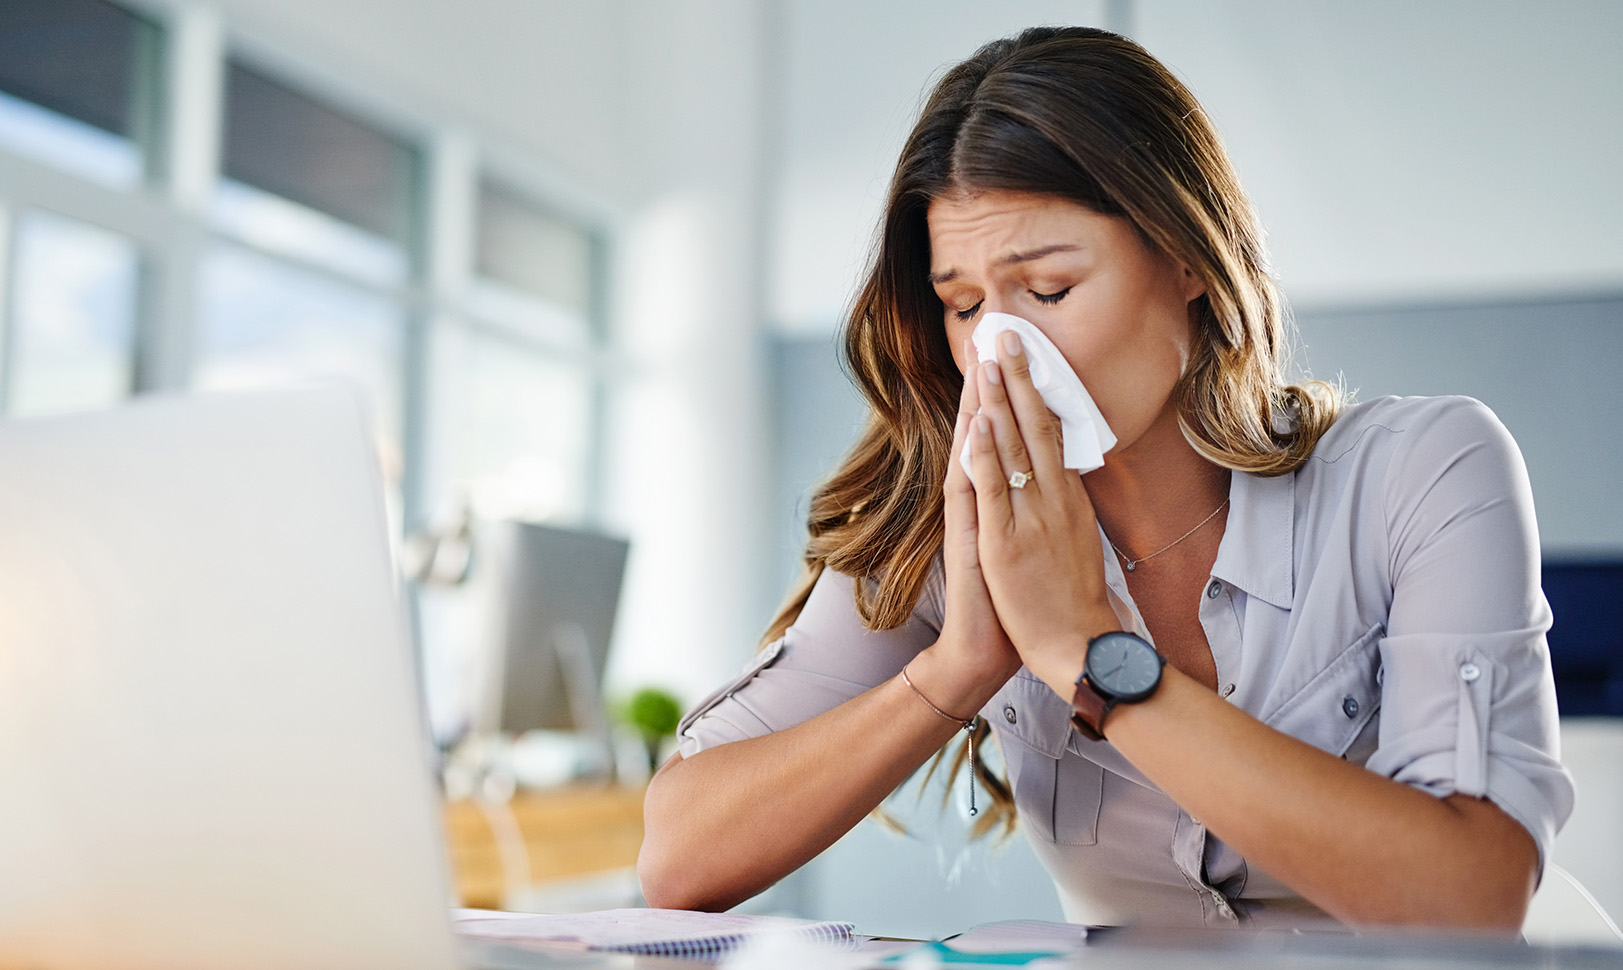 Don't know if you have allergies or a cold? We can help!